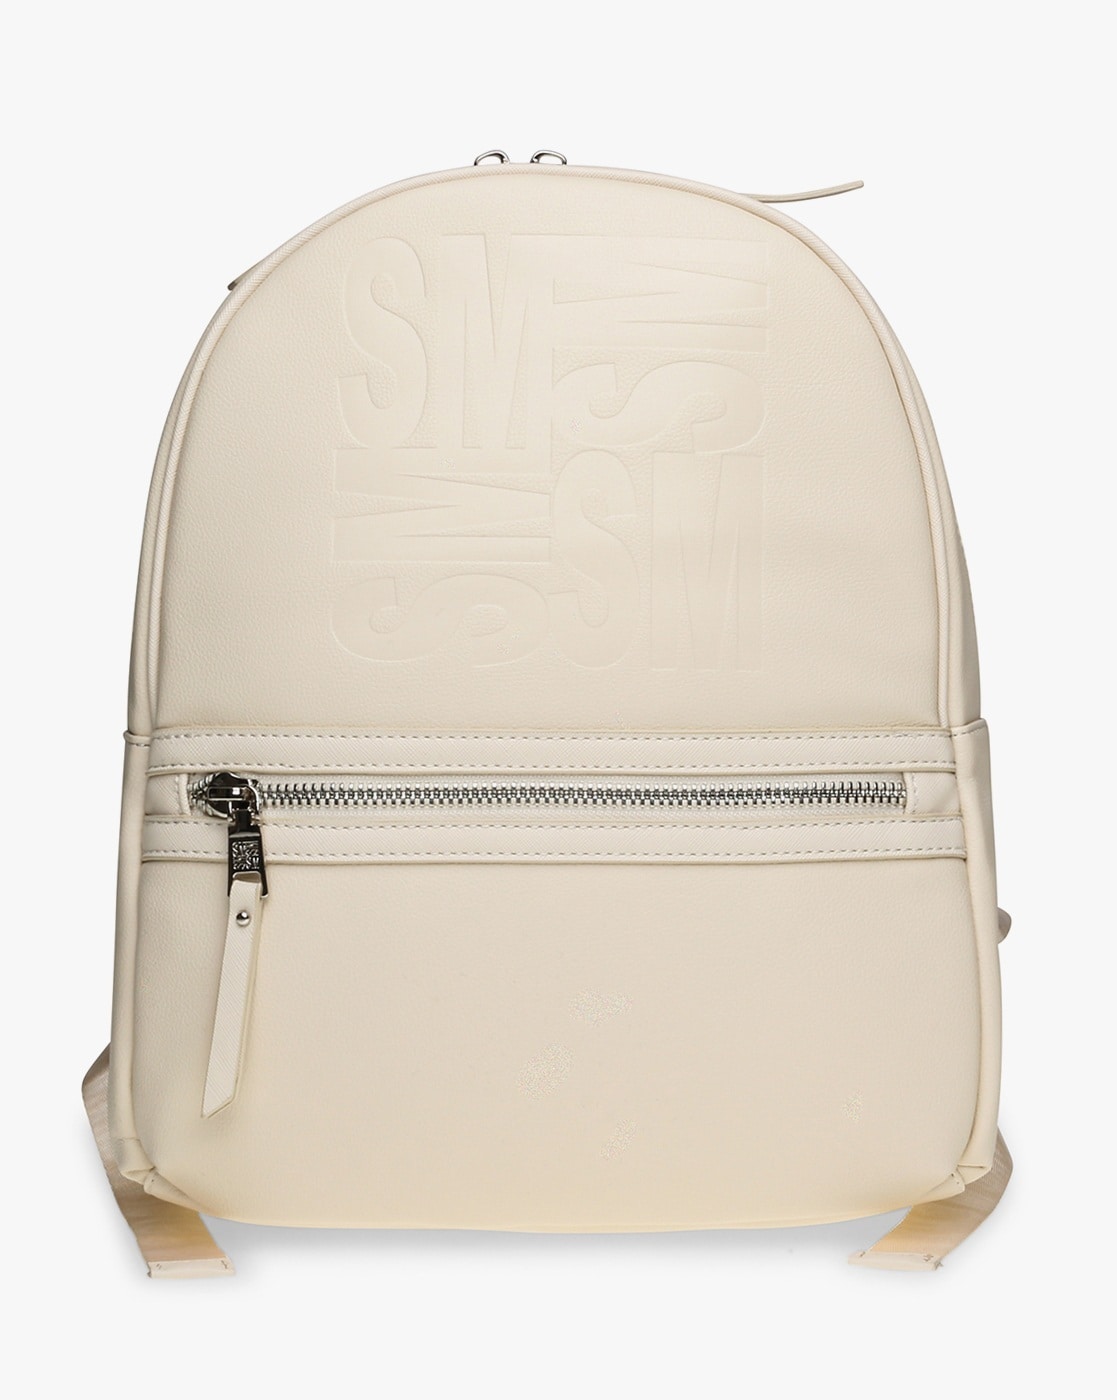 Buy LaGaksta Submedium Leather Backpack Purse White Tan Leather Online at  Lowest Price Ever in India | Check Reviews & Ratings - Shop The World